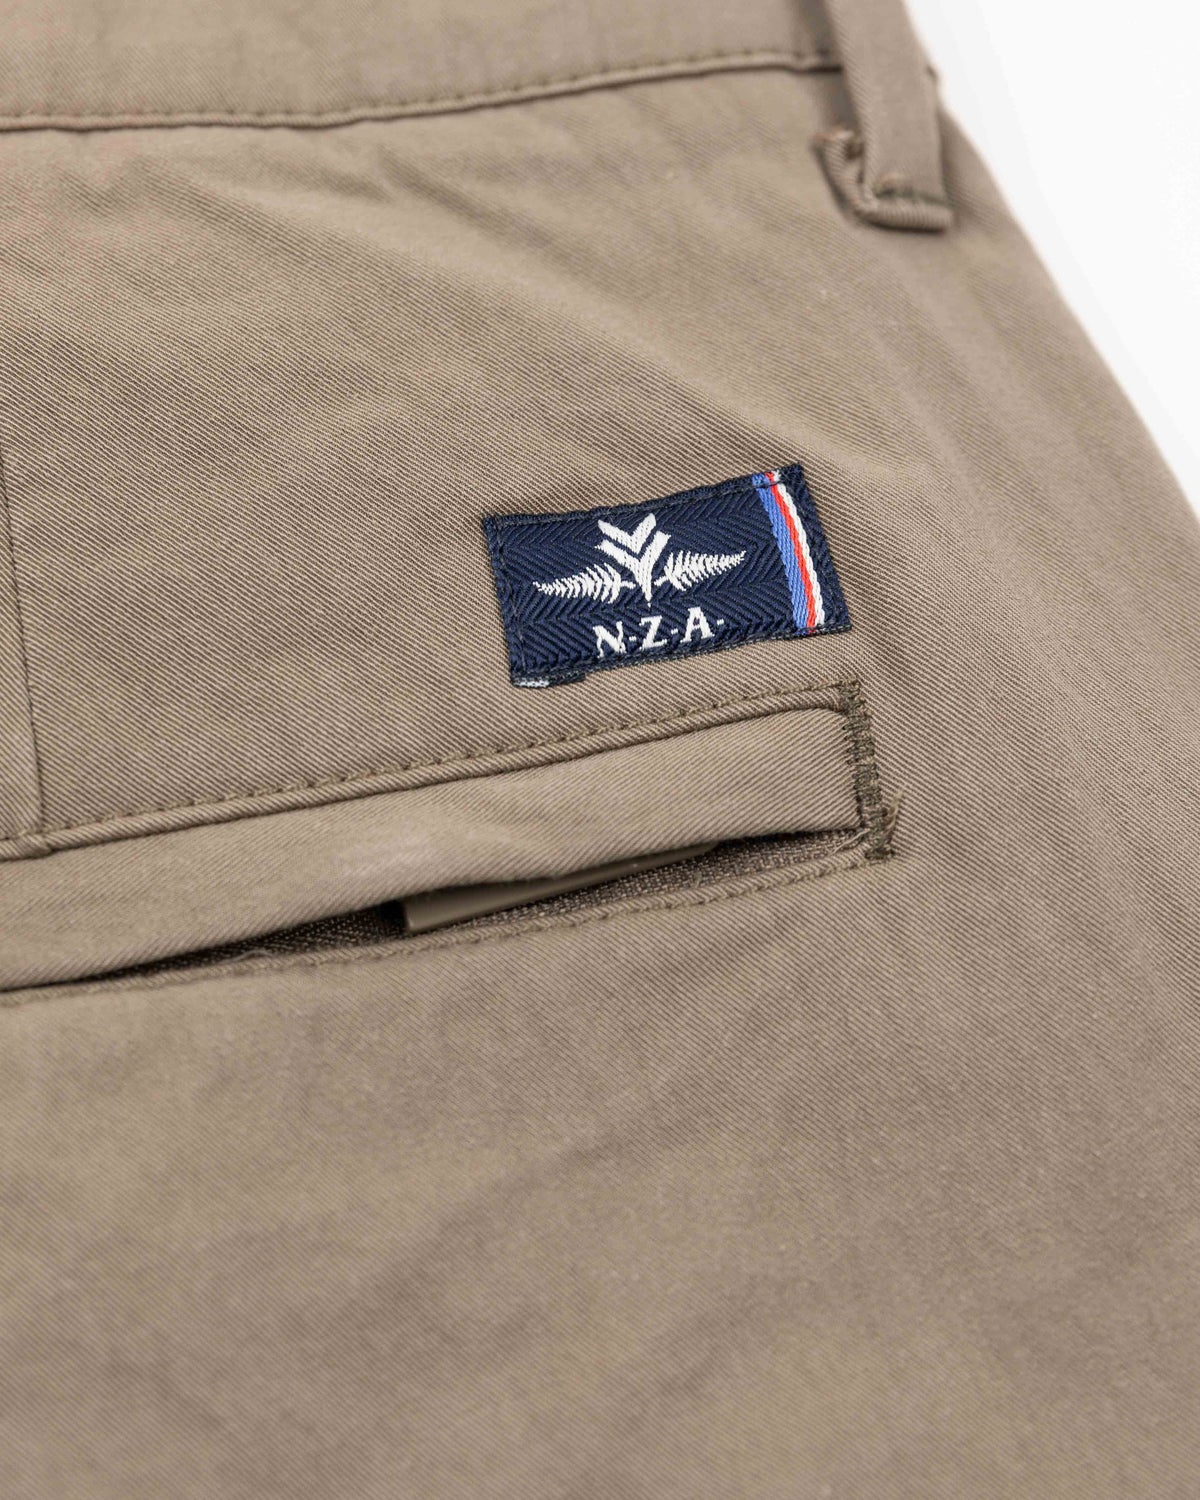 Solid coloured stretch chino - Misty Army